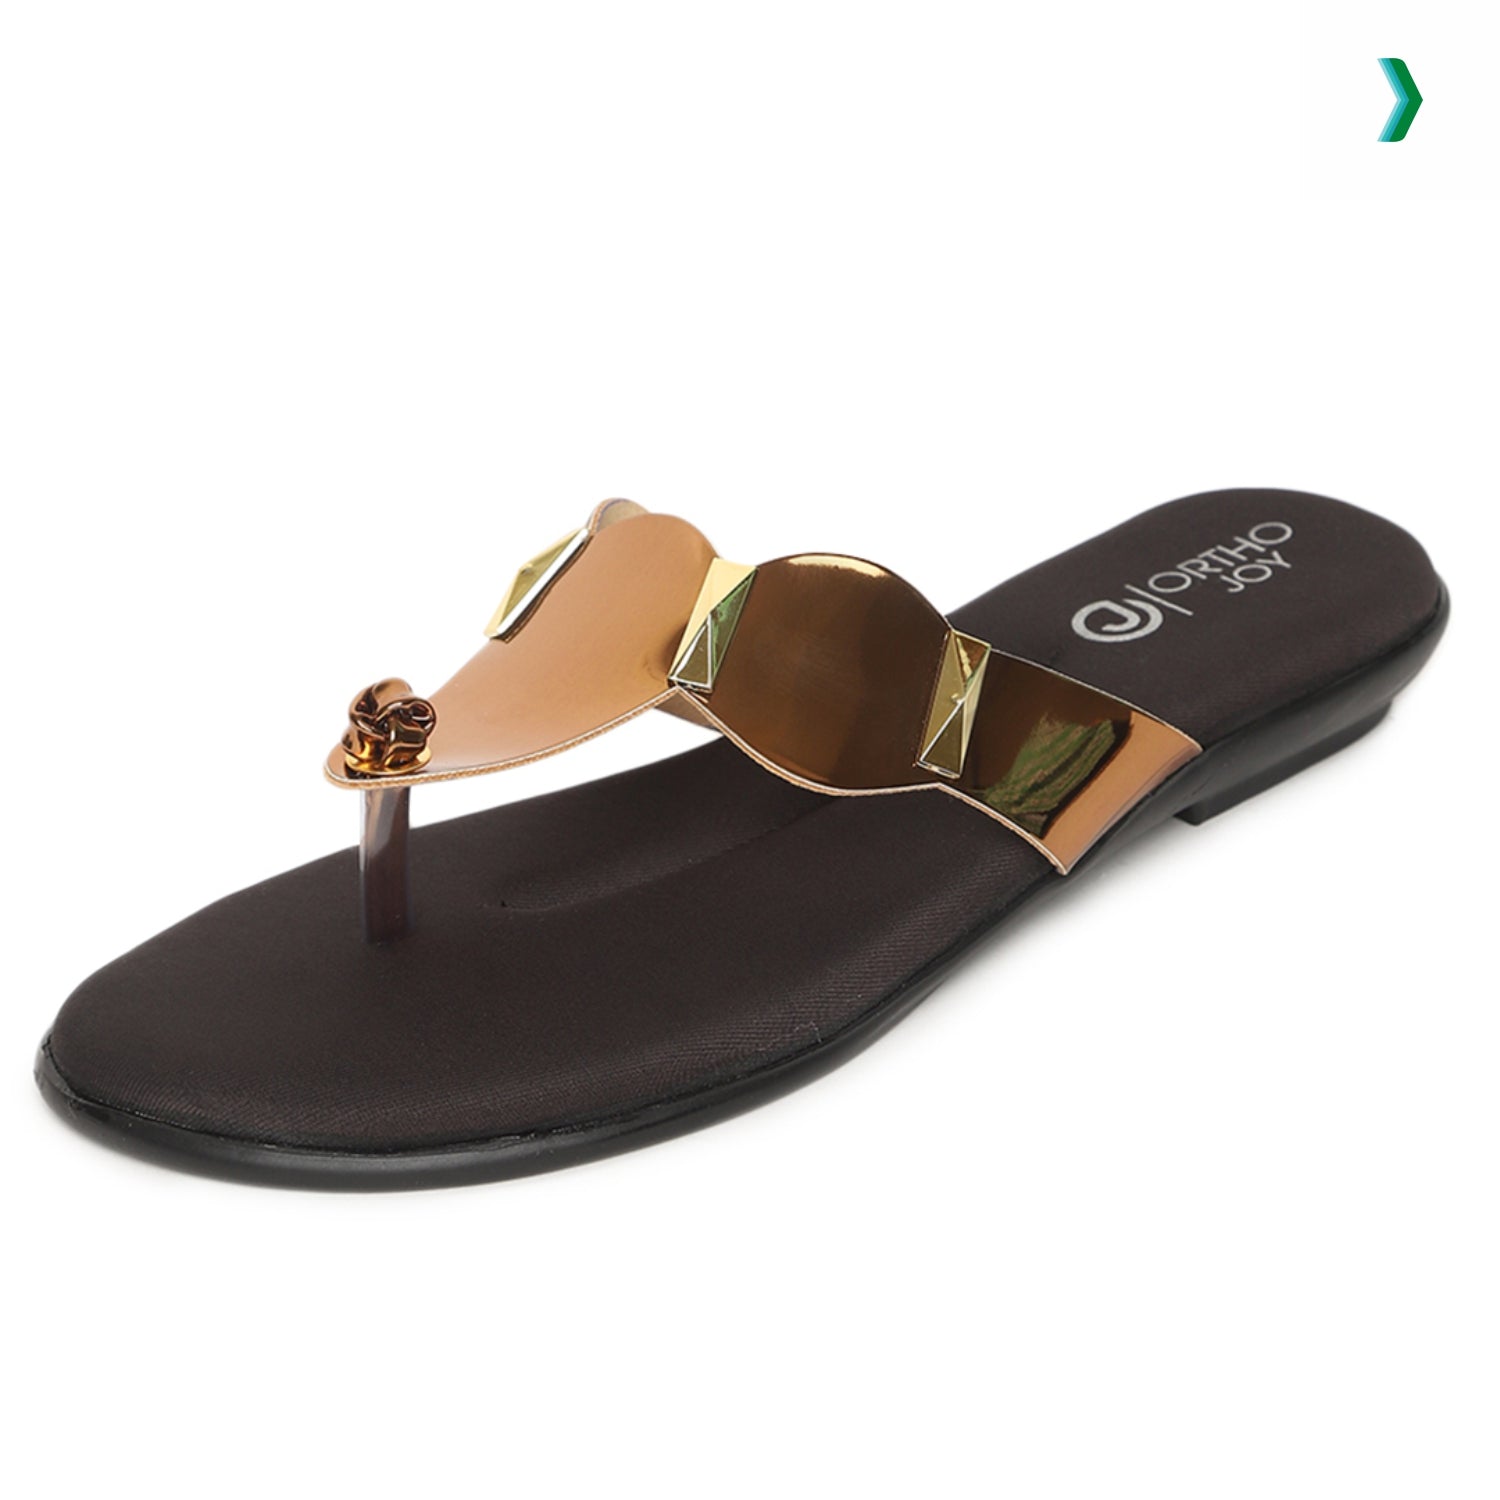 Buy comfortable flat sandals for women at best price – OrthoJoy